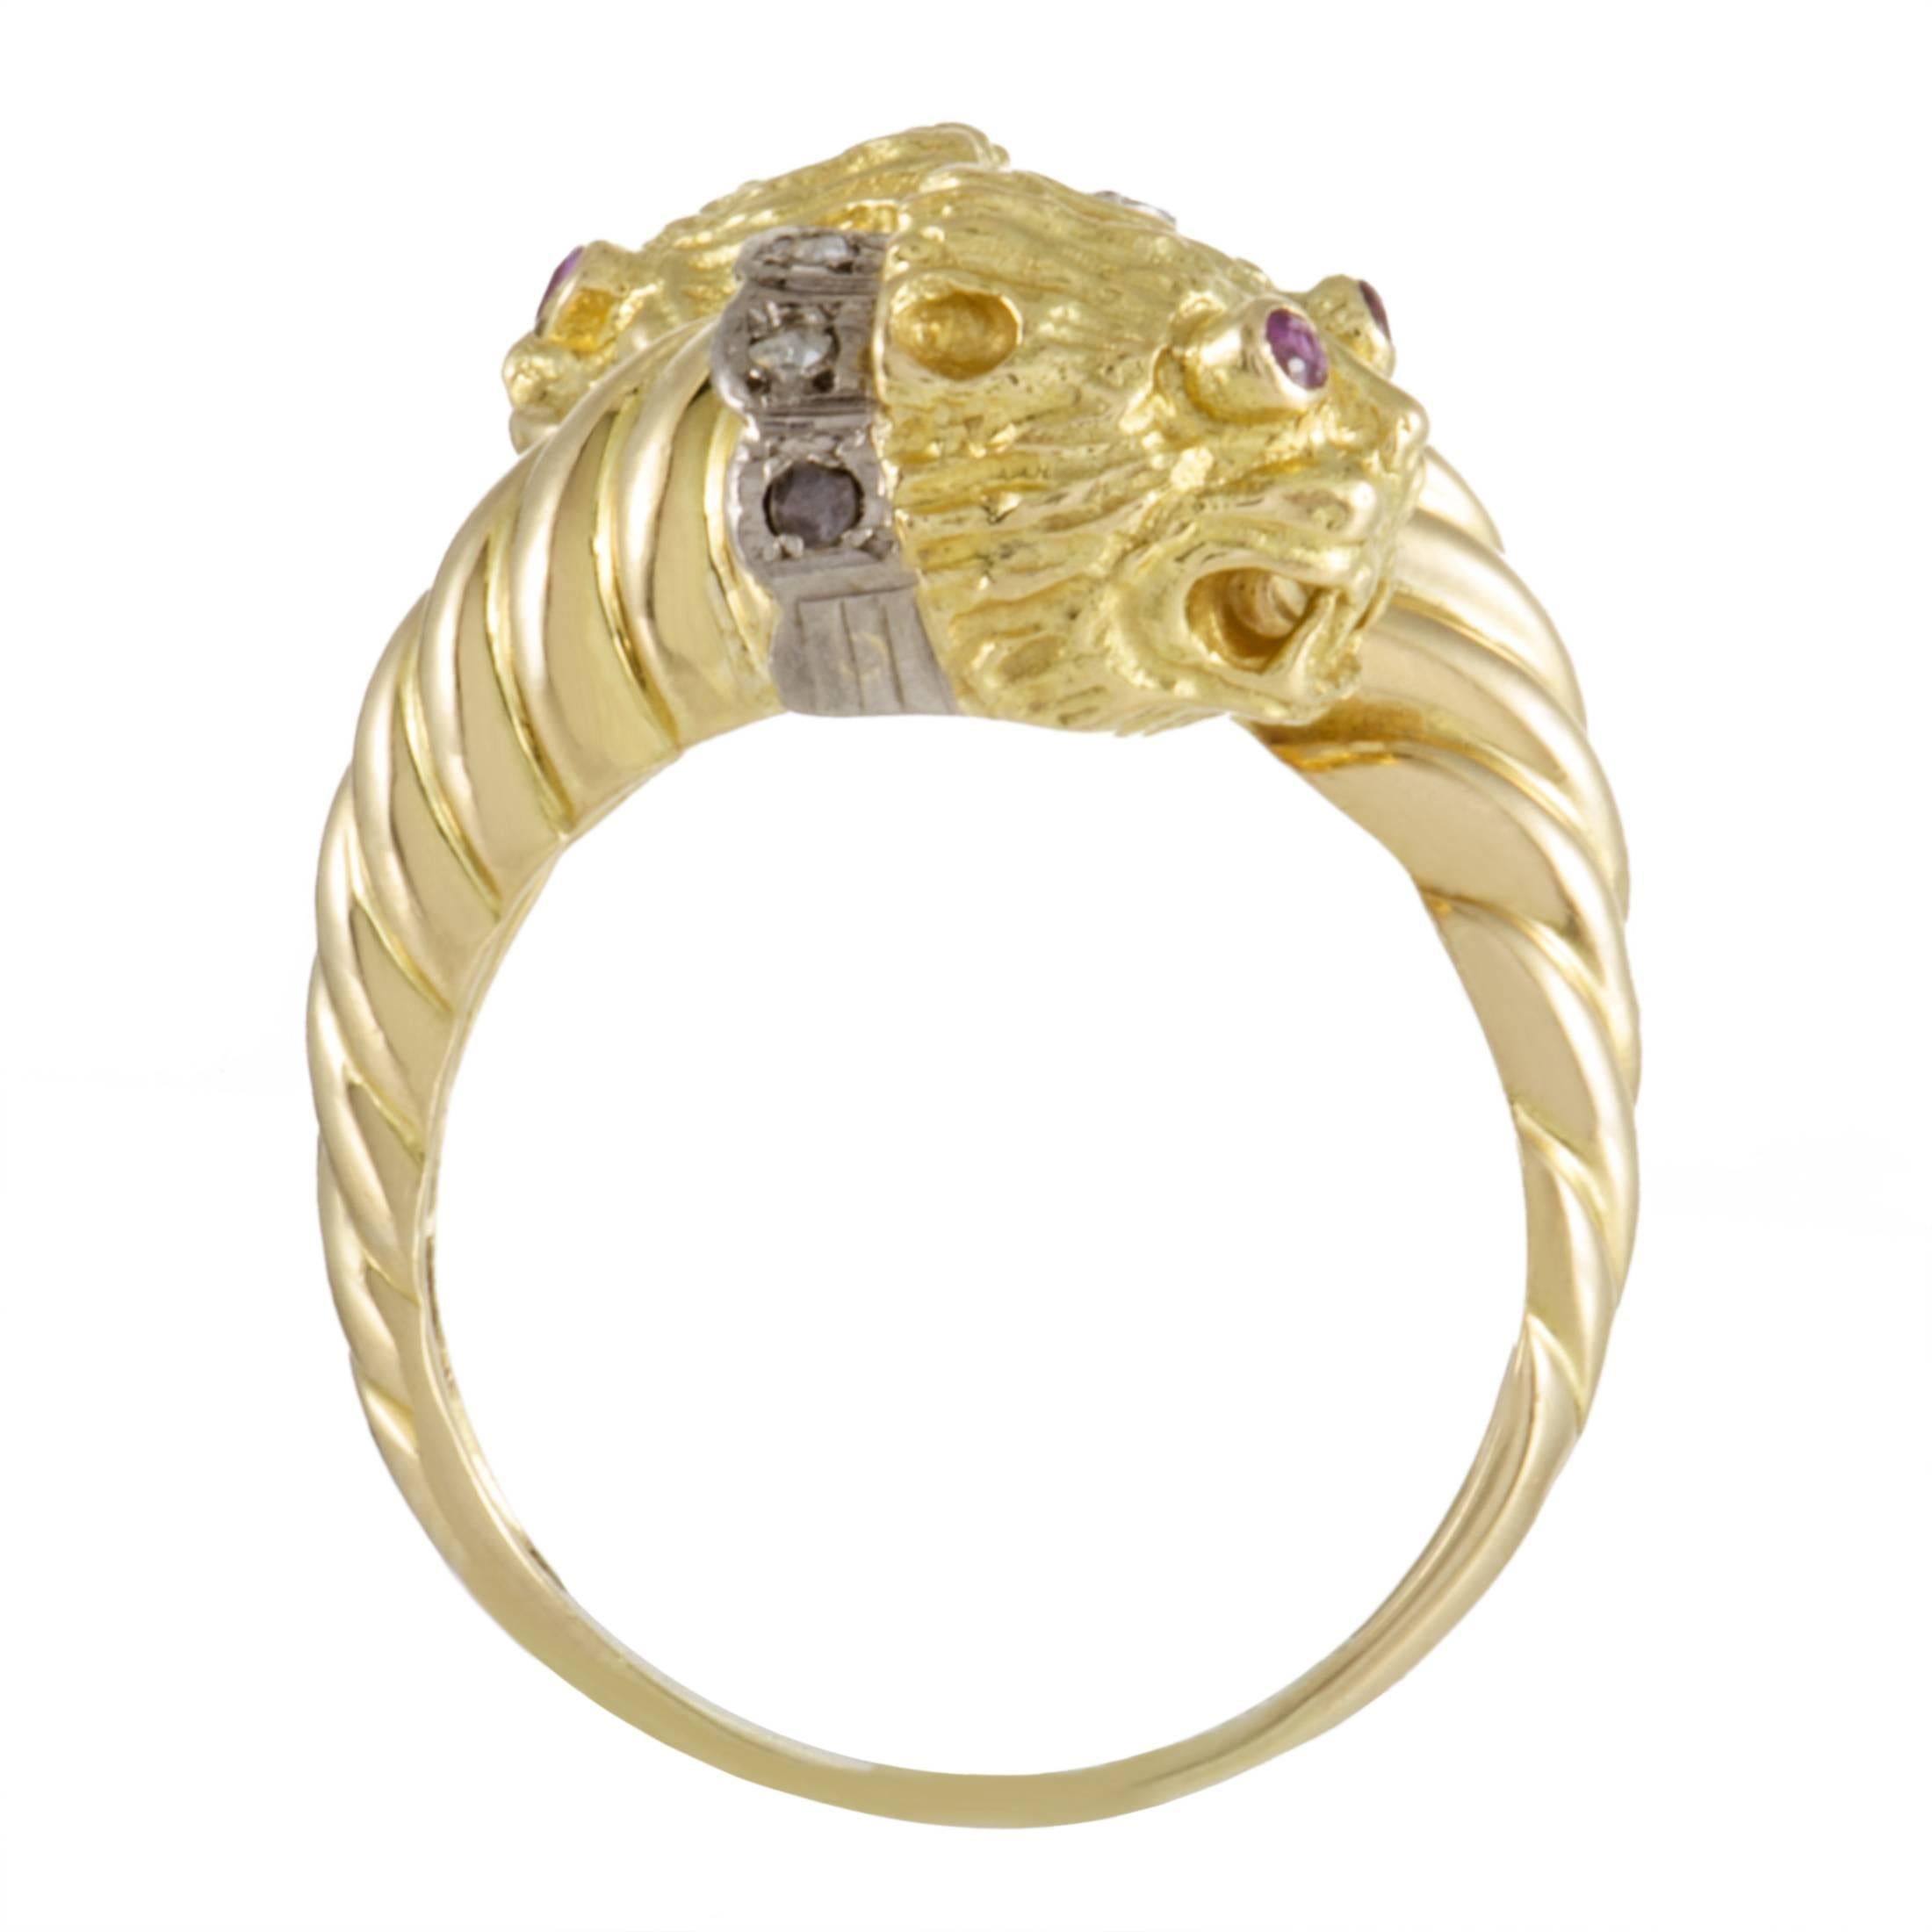 Intricately ornamented and crafted with exquisite expertise, the prestigious 18K yellow gold produces exceptional play of light in this stunning ring from Ilias Lalaounis which is also adorned with gorgeous rubies while glistening diamonds totaling